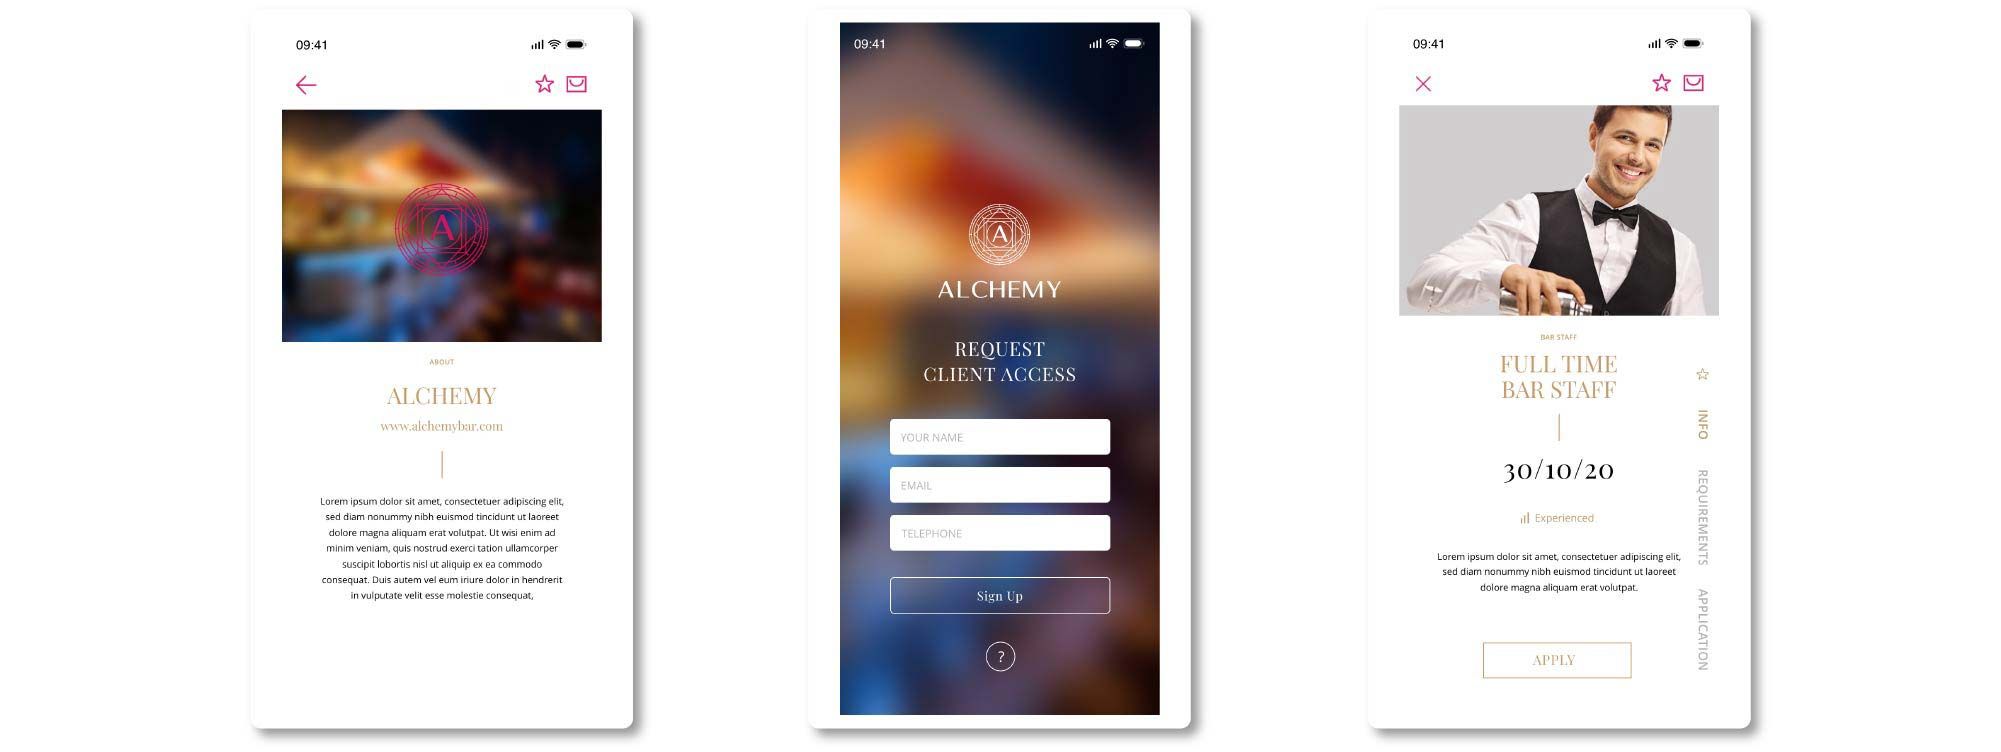 Alchemy,Mobile App,eshop,applab projects